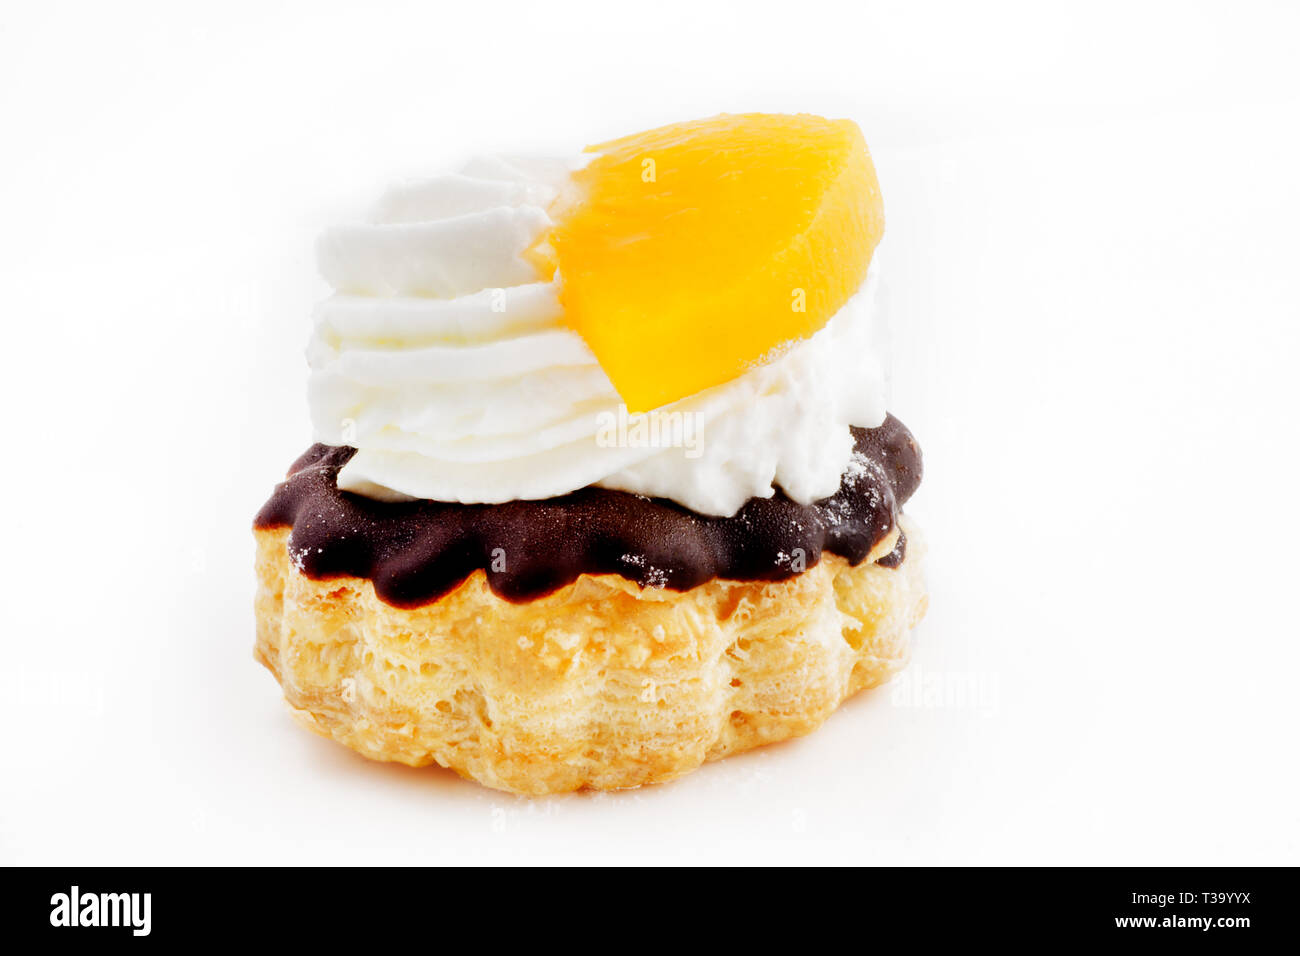 Mini puff pastry cake with fruit and cream filling Stock Photo